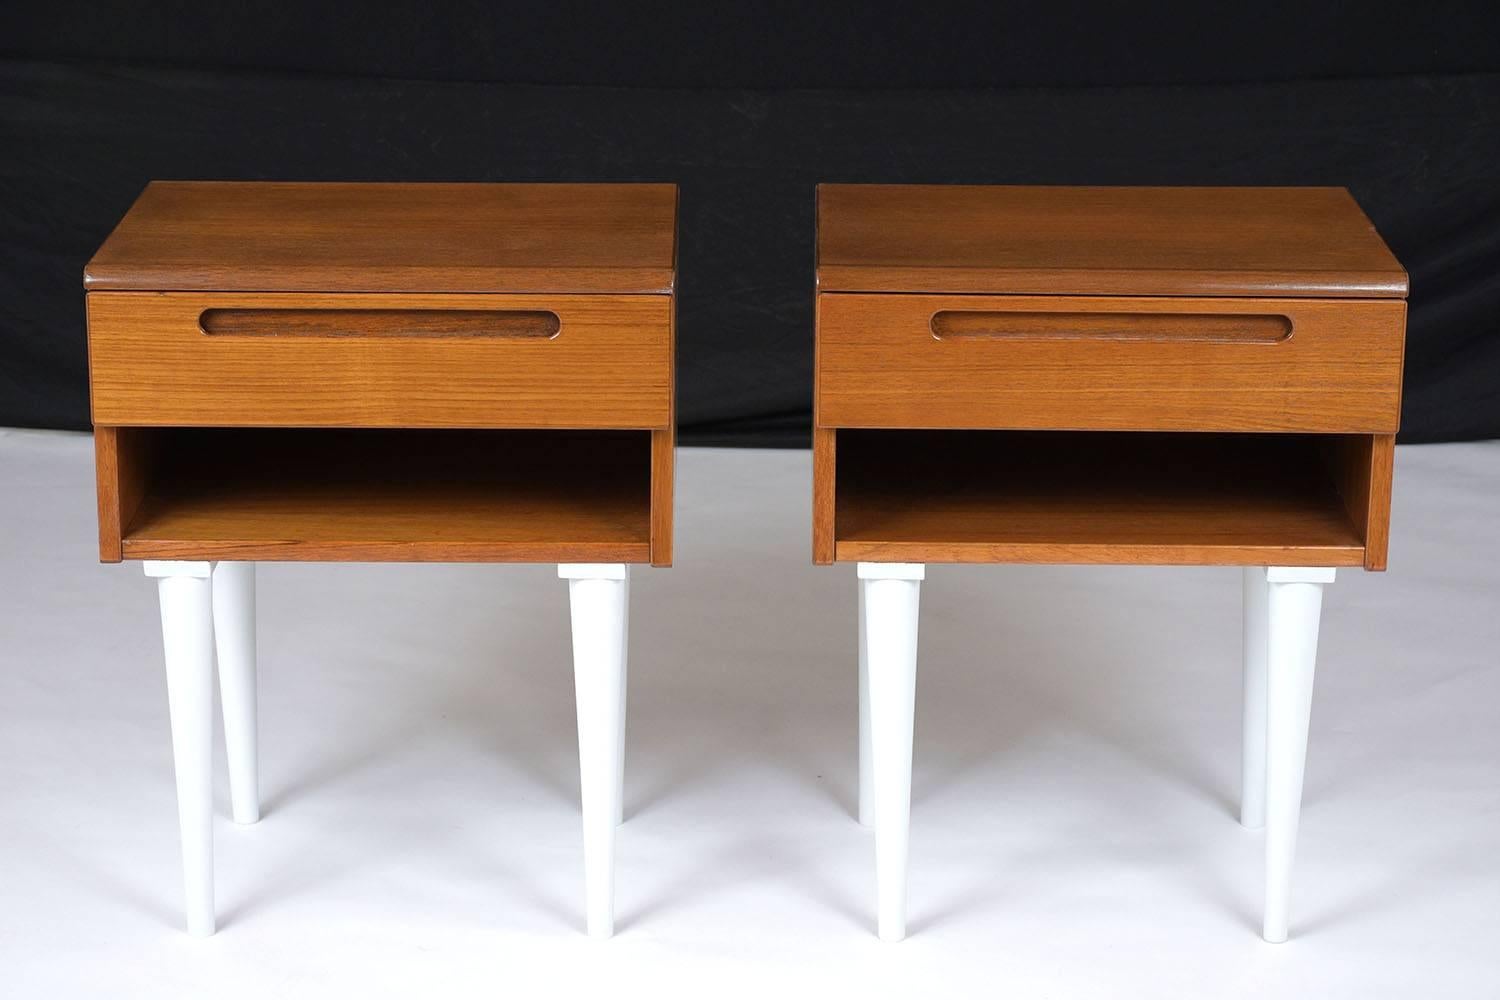 Turned Danish Mid-Century Modern-Style Nightstands, a Pair